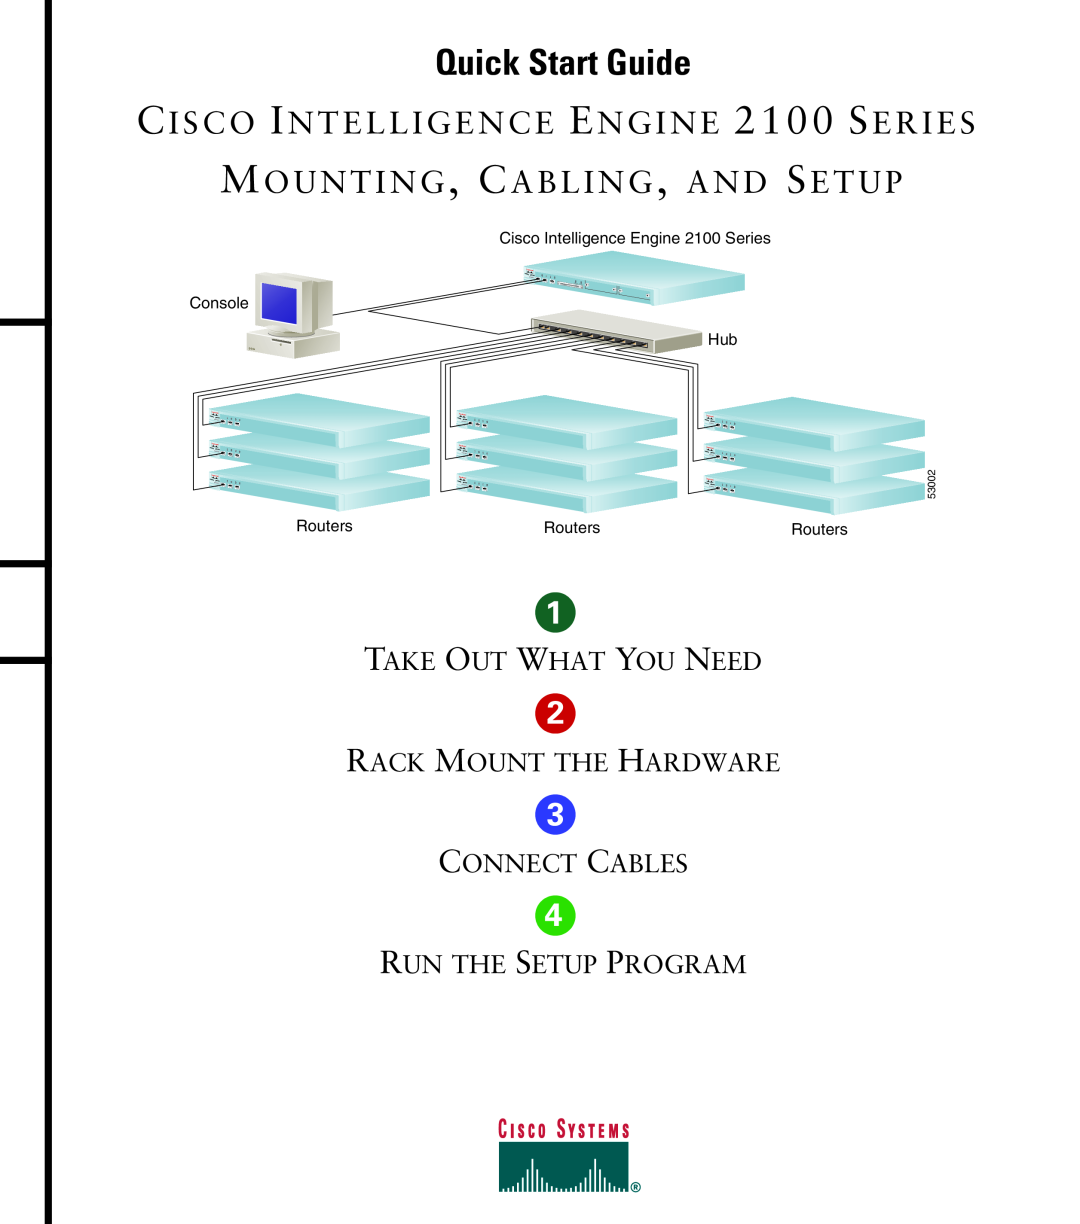 Cisco Systems 2100 quick start Quick Start Guide, Take Out What You Need, Rack Mount The Hardware, Connect Cables, 53002 